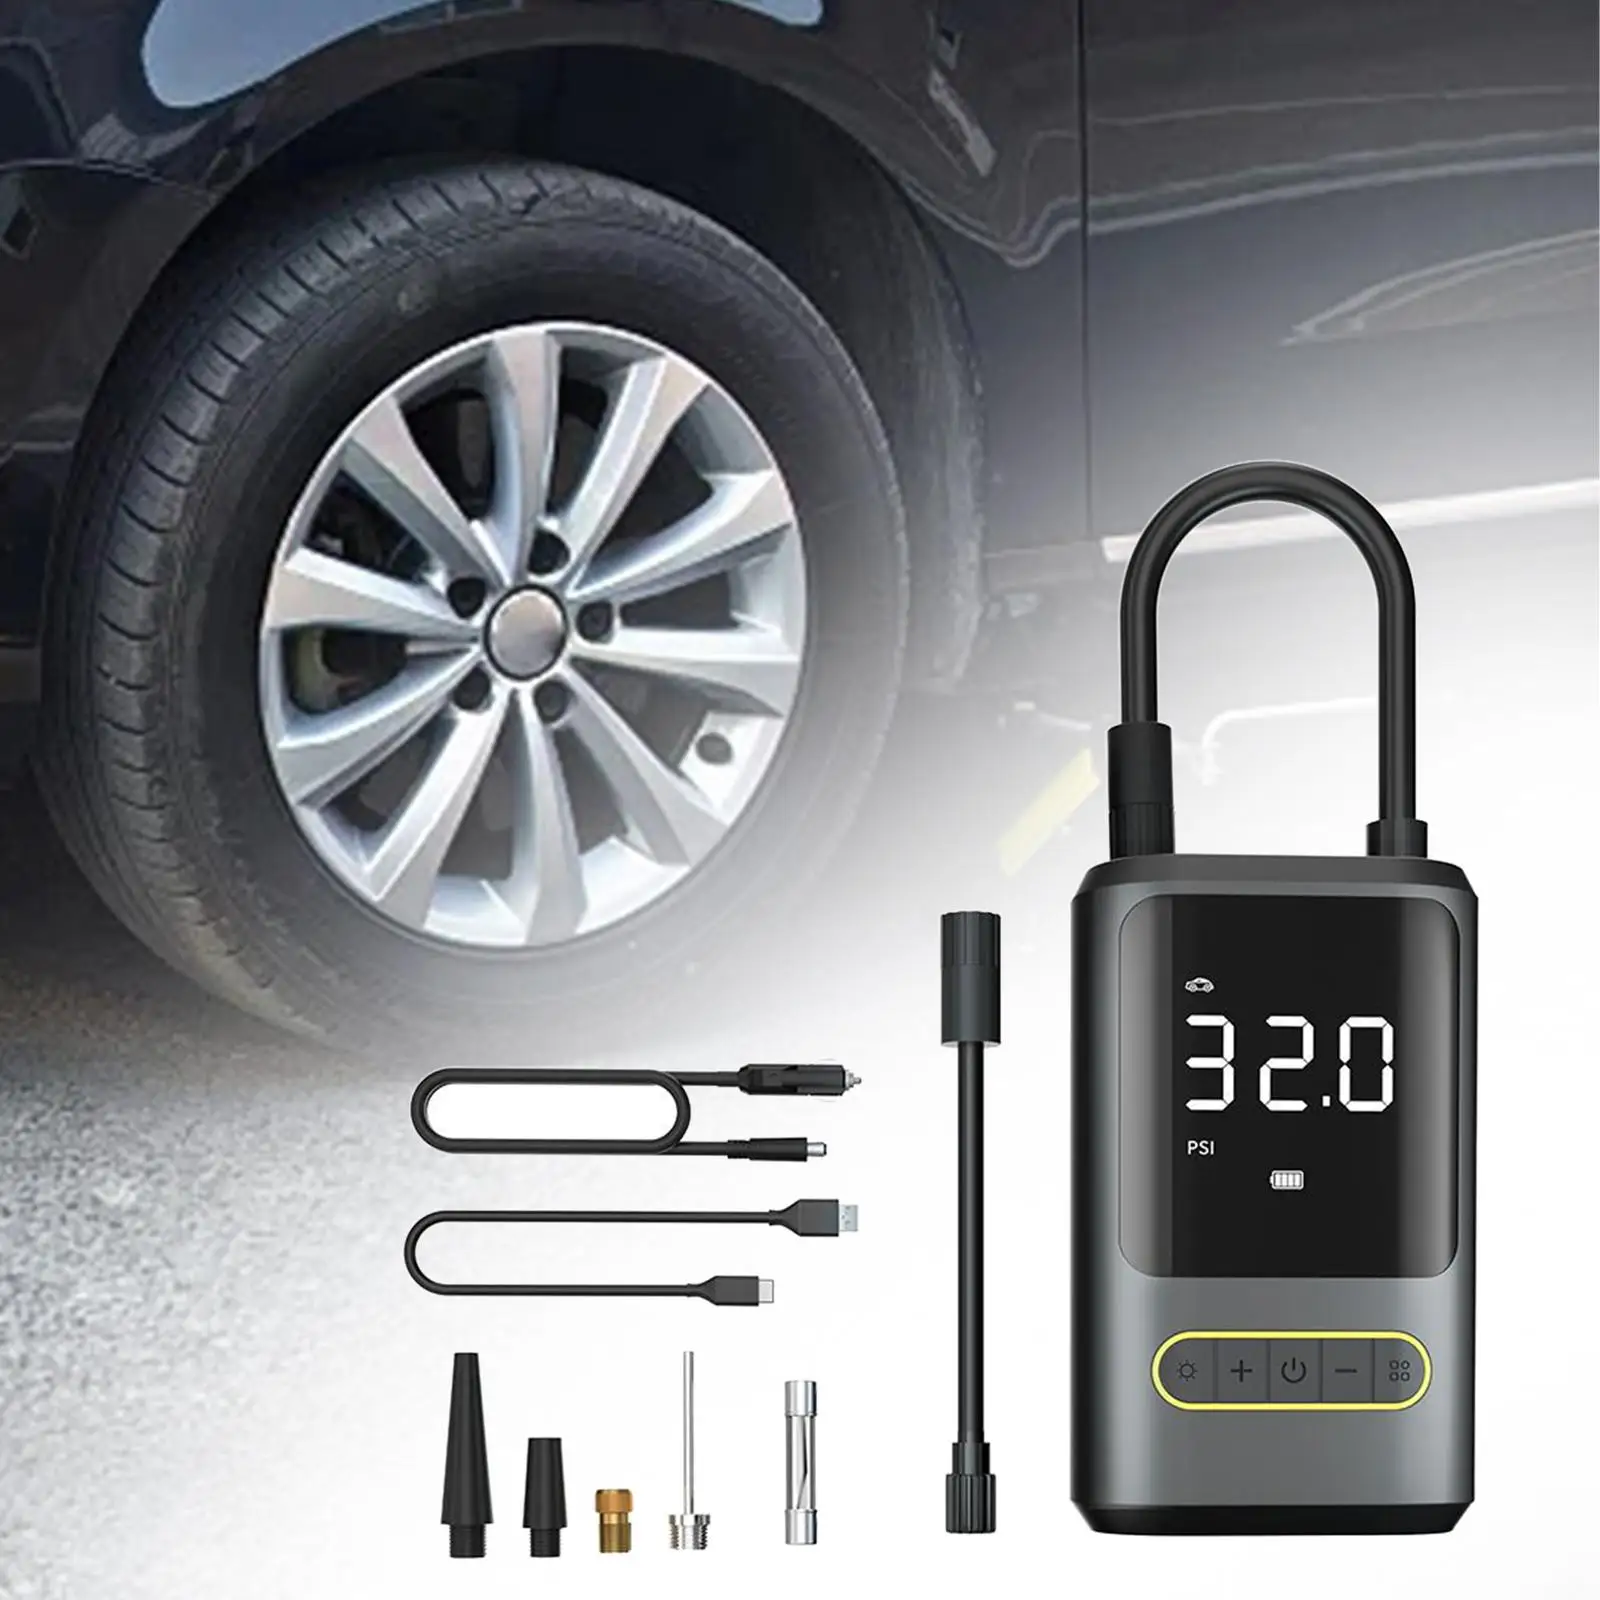 Automobile Tire Inflator Professional Mini Durable Illumination Tire Air Pump for Bicycle Balls Cars Truck Motorcycles